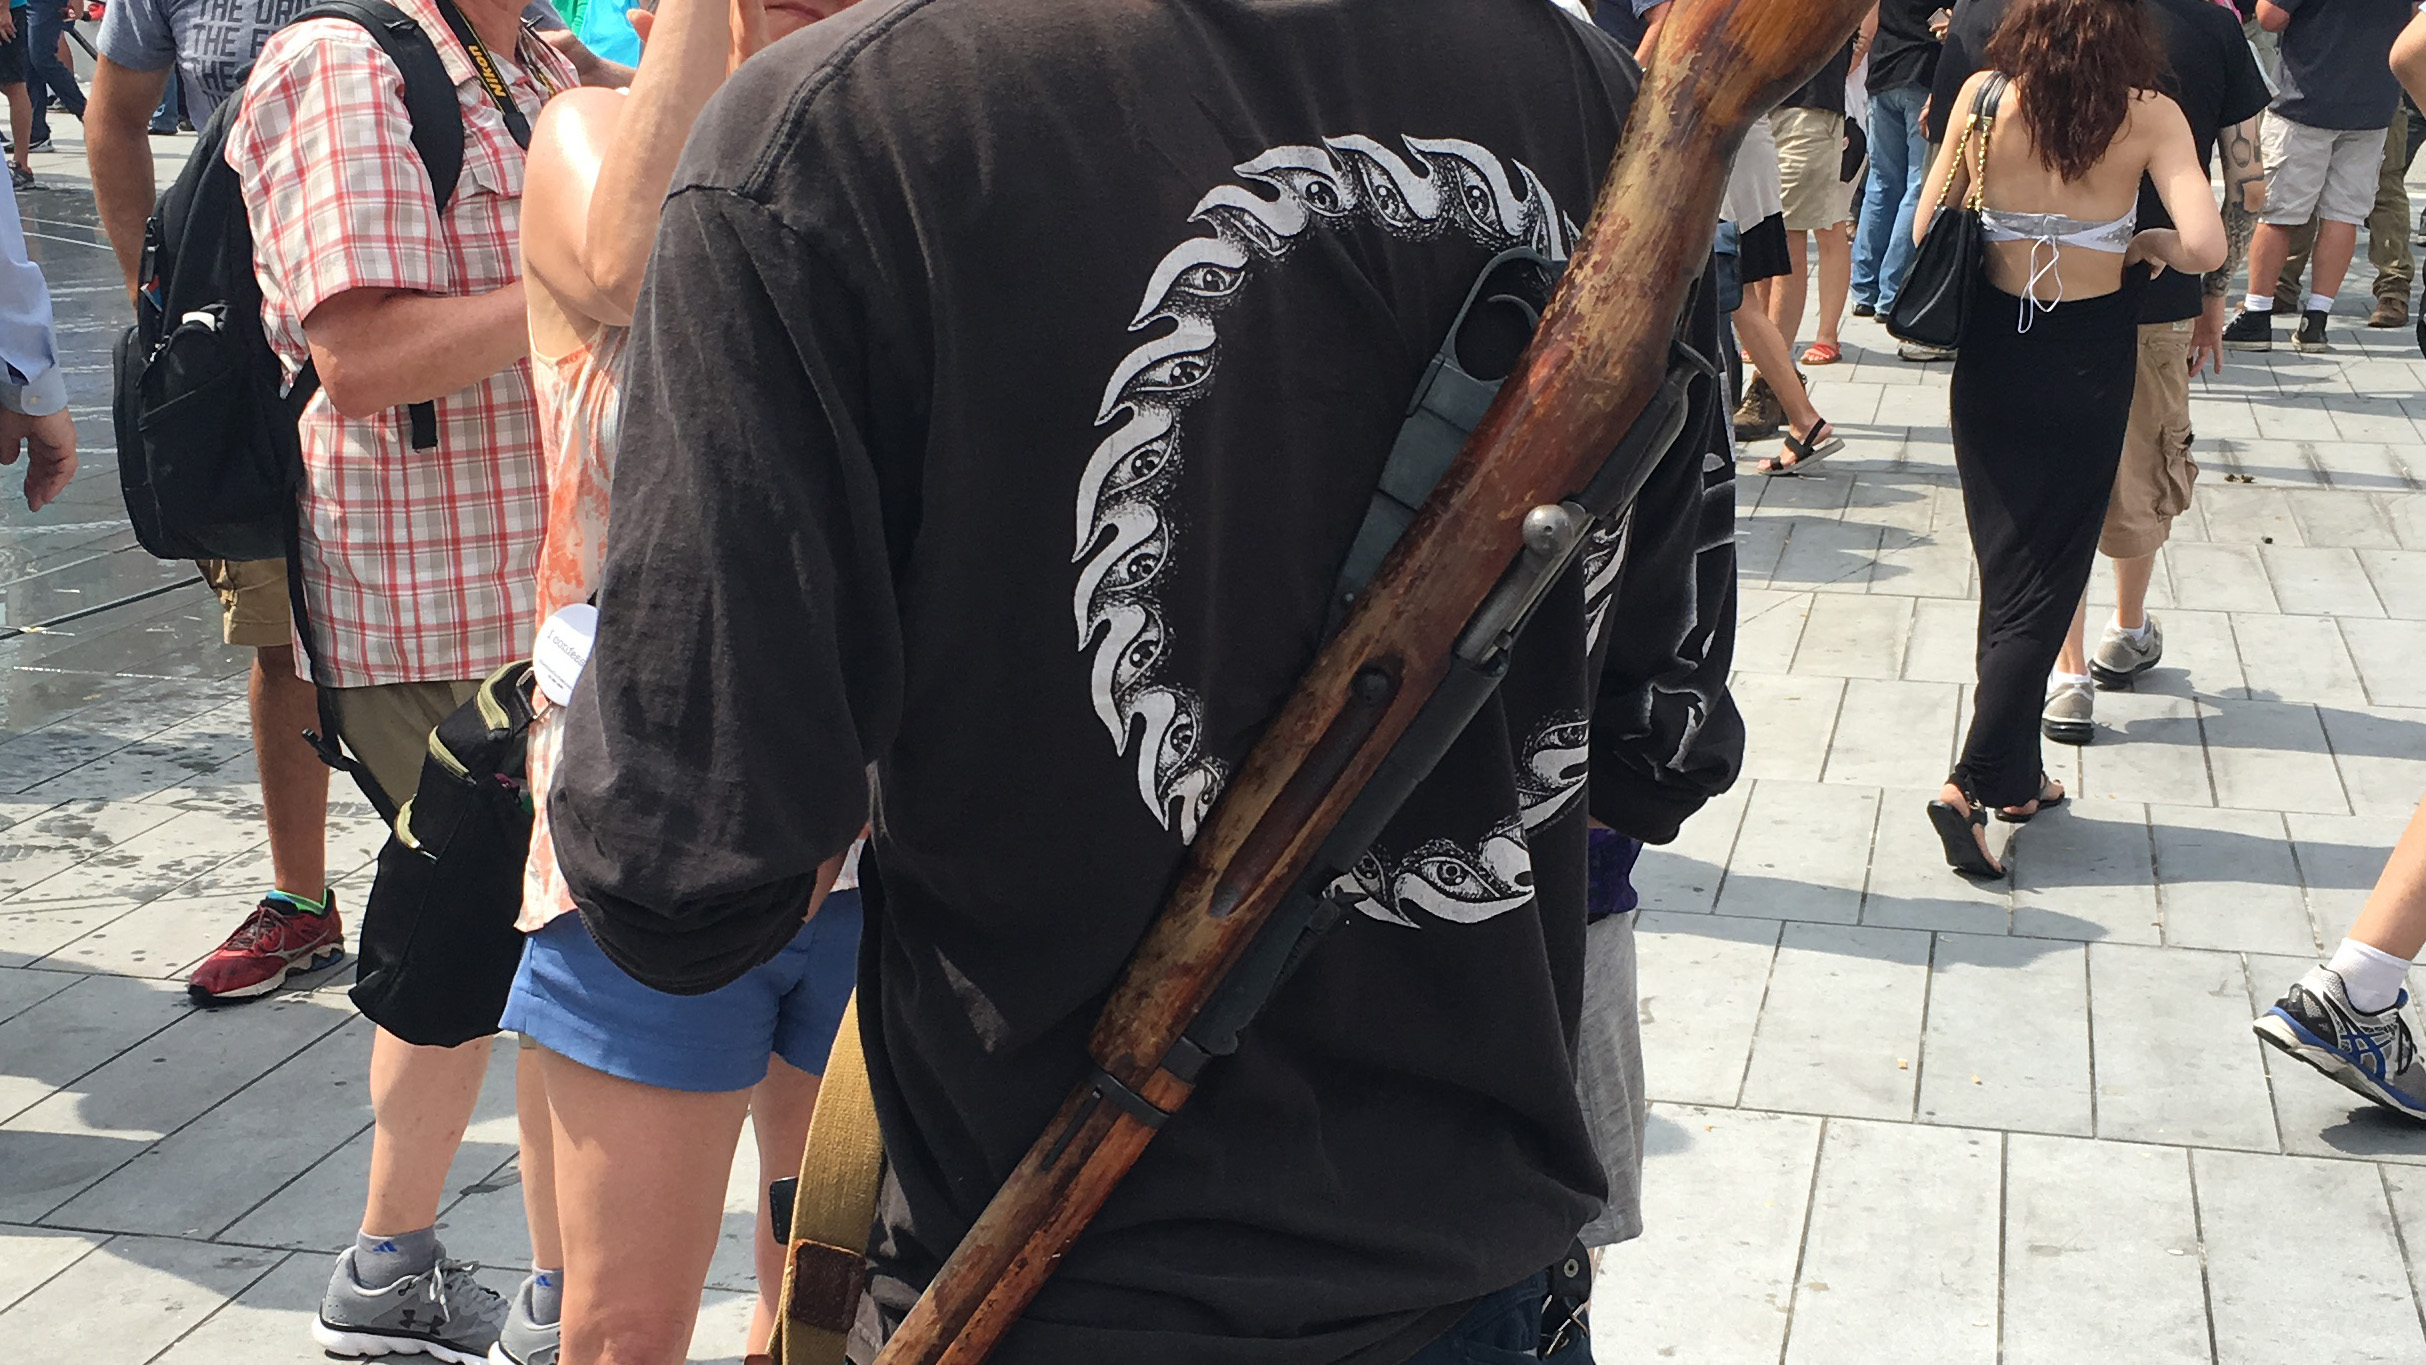 Open carry advocates descend upon RNC